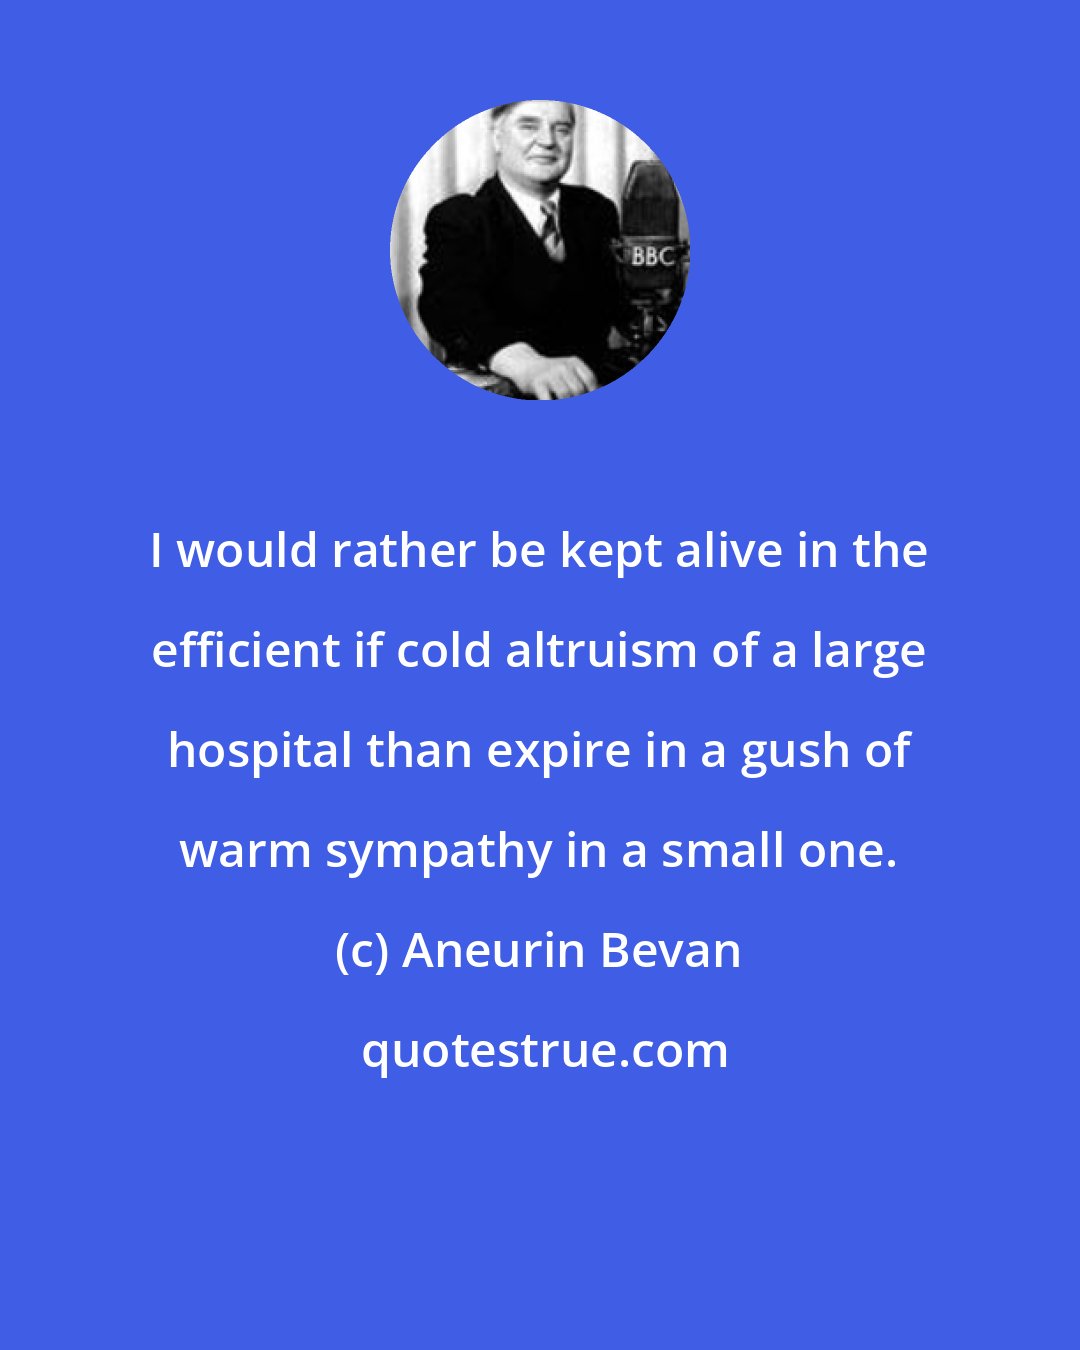 Aneurin Bevan: I would rather be kept alive in the efficient if cold altruism of a large hospital than expire in a gush of warm sympathy in a small one.